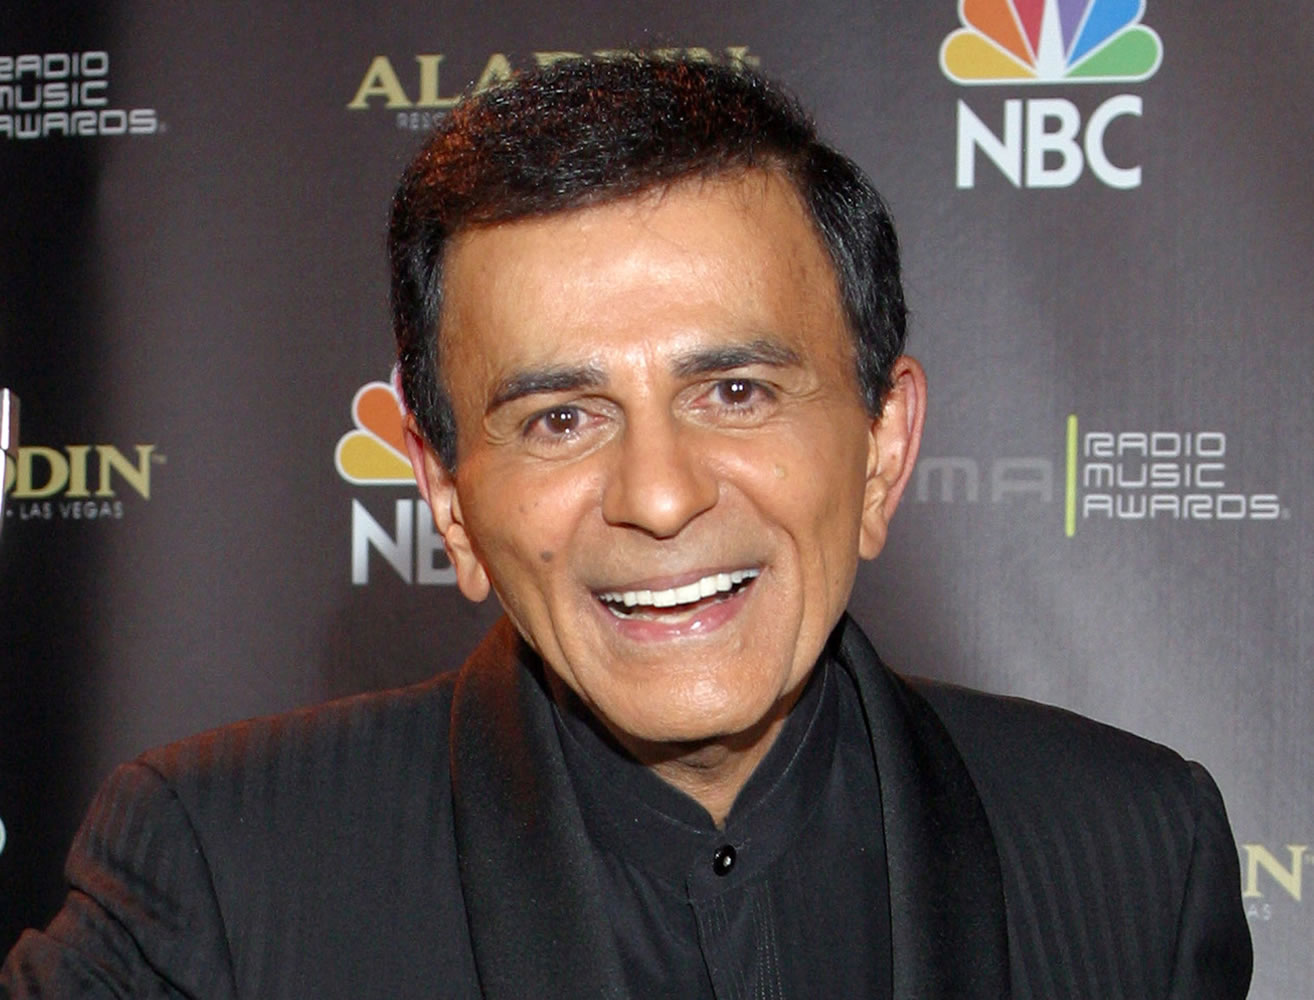 Casey Kasem receives the Radio Icon award during The 2003 Radio Music Awards at the Aladdin Resort and Casino in Las Vegas. A judge has expanded the powers of Casey Kasem's daughter to determine whether her father is receiving adequate medical care and says he still has concerns about the ailing radio personalityis health and welfare.